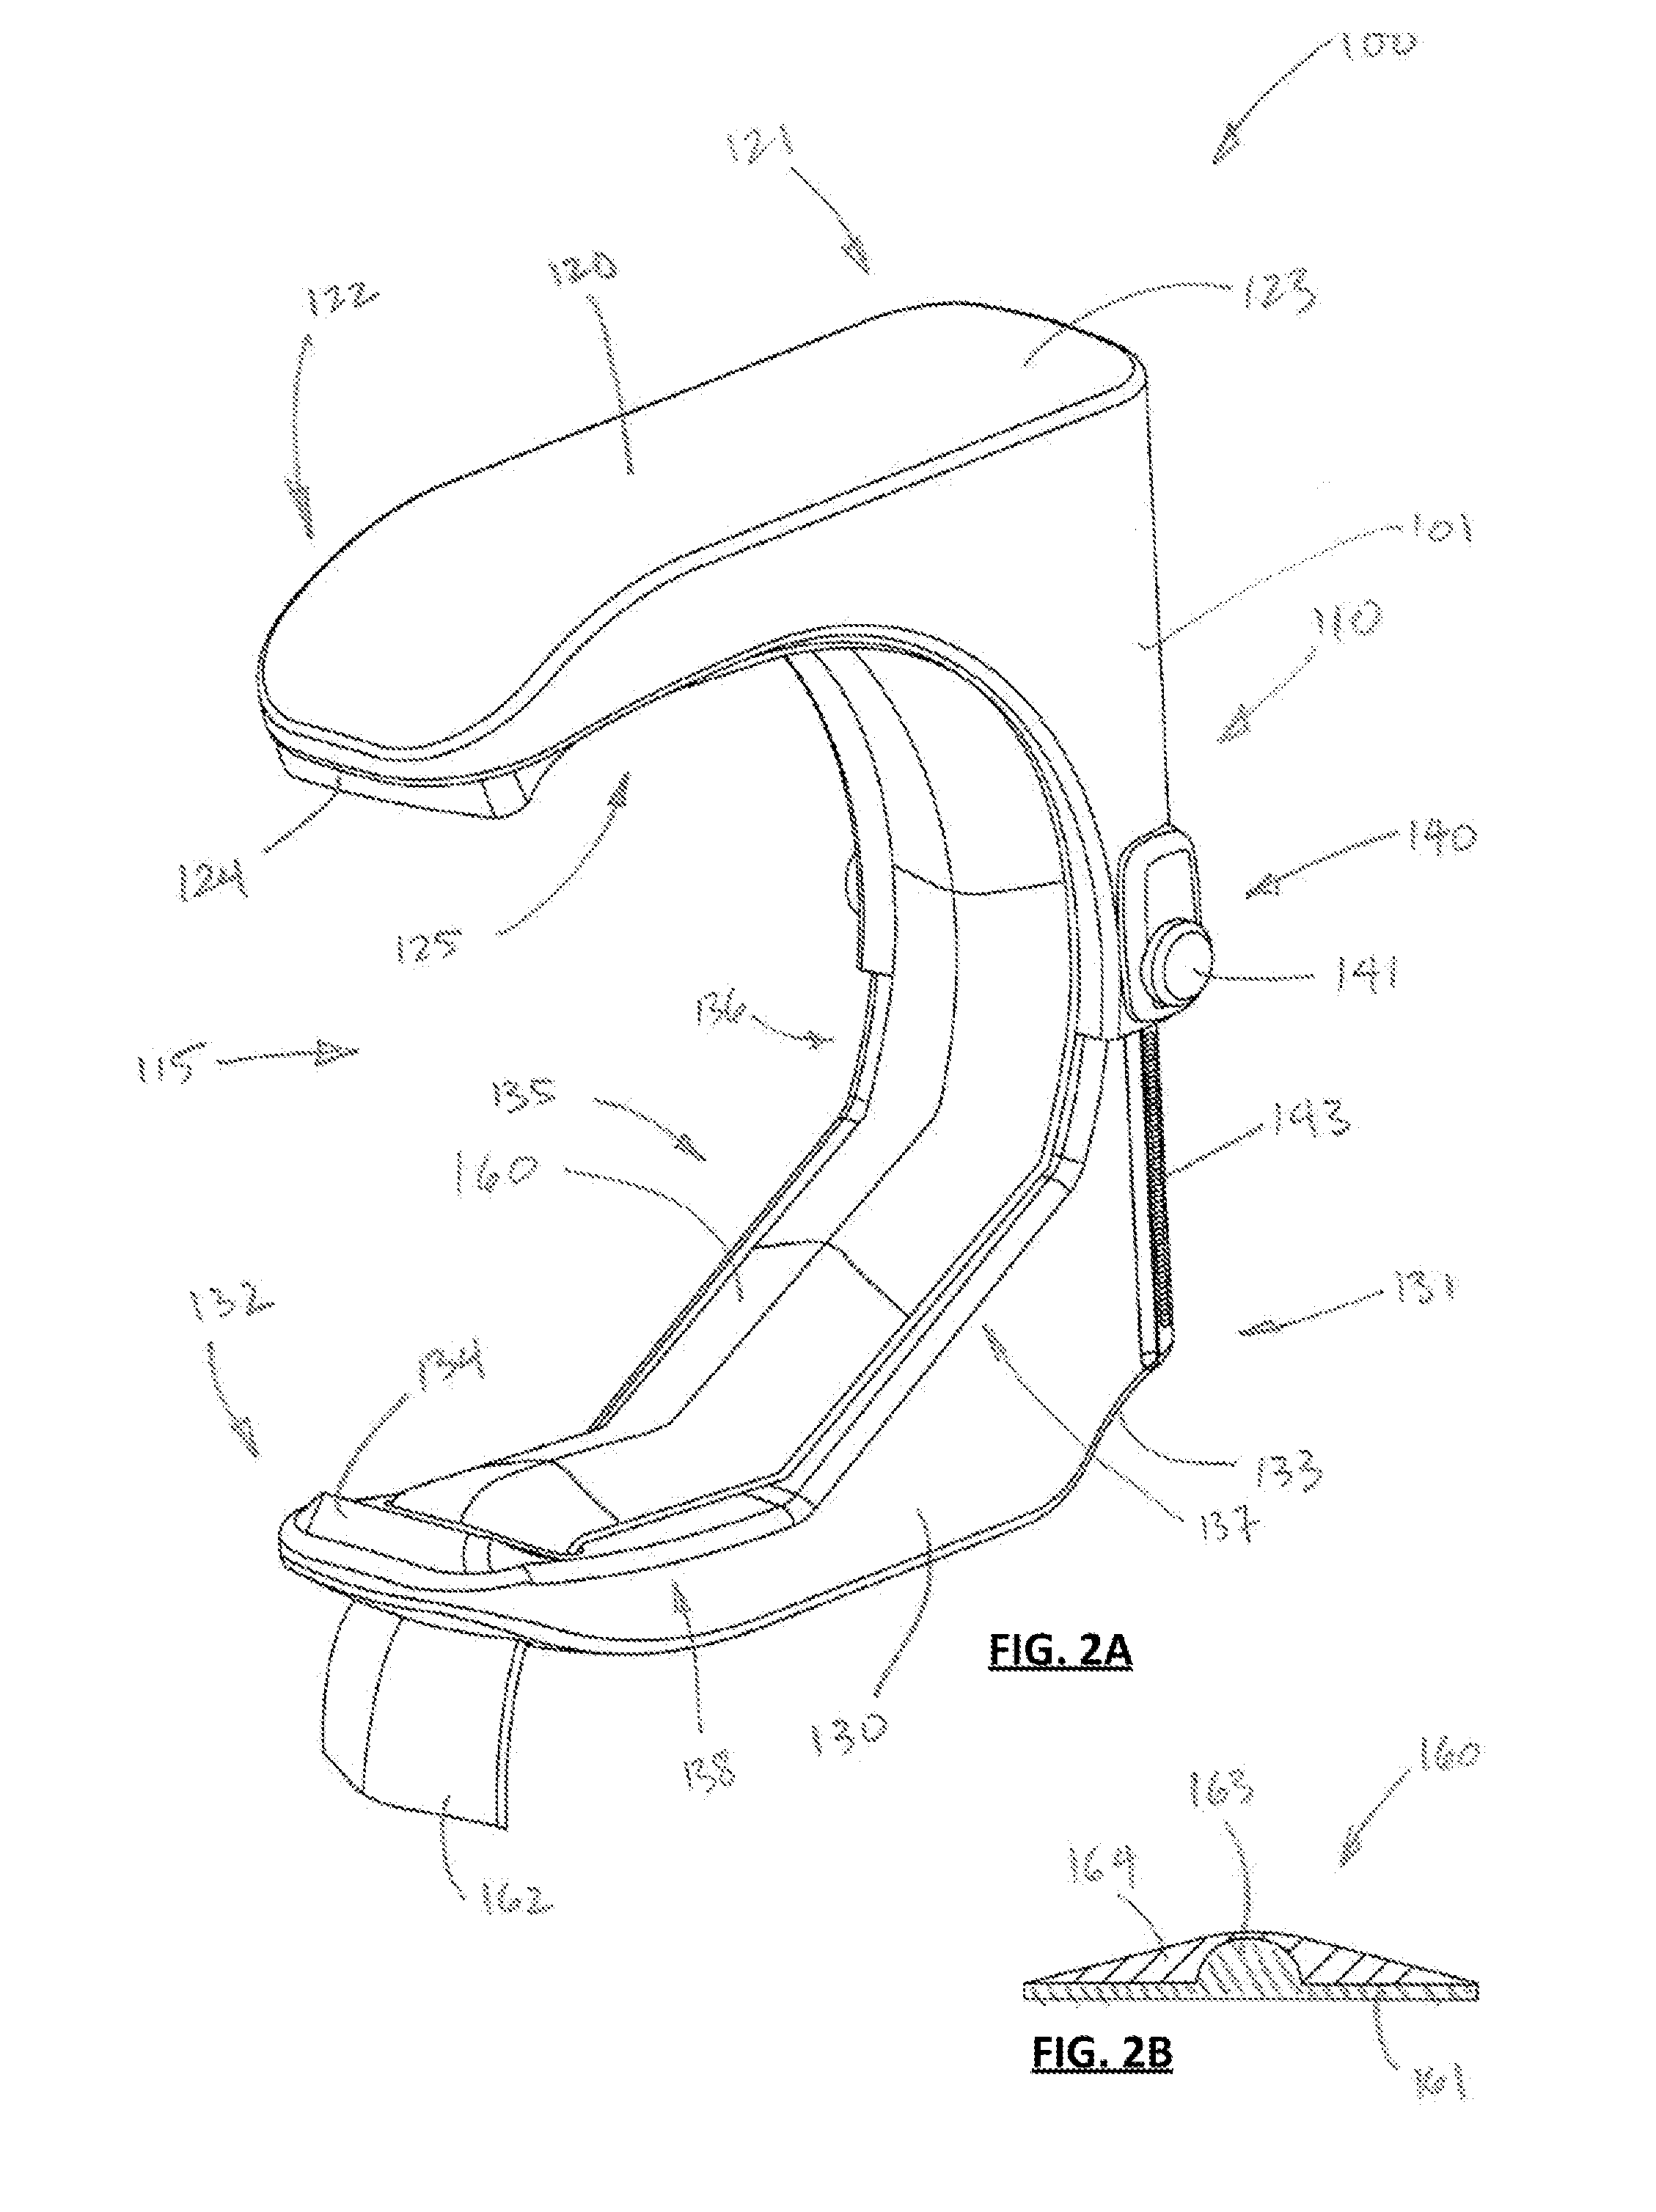 Clamping Device for Reducing Venous Blood Flow